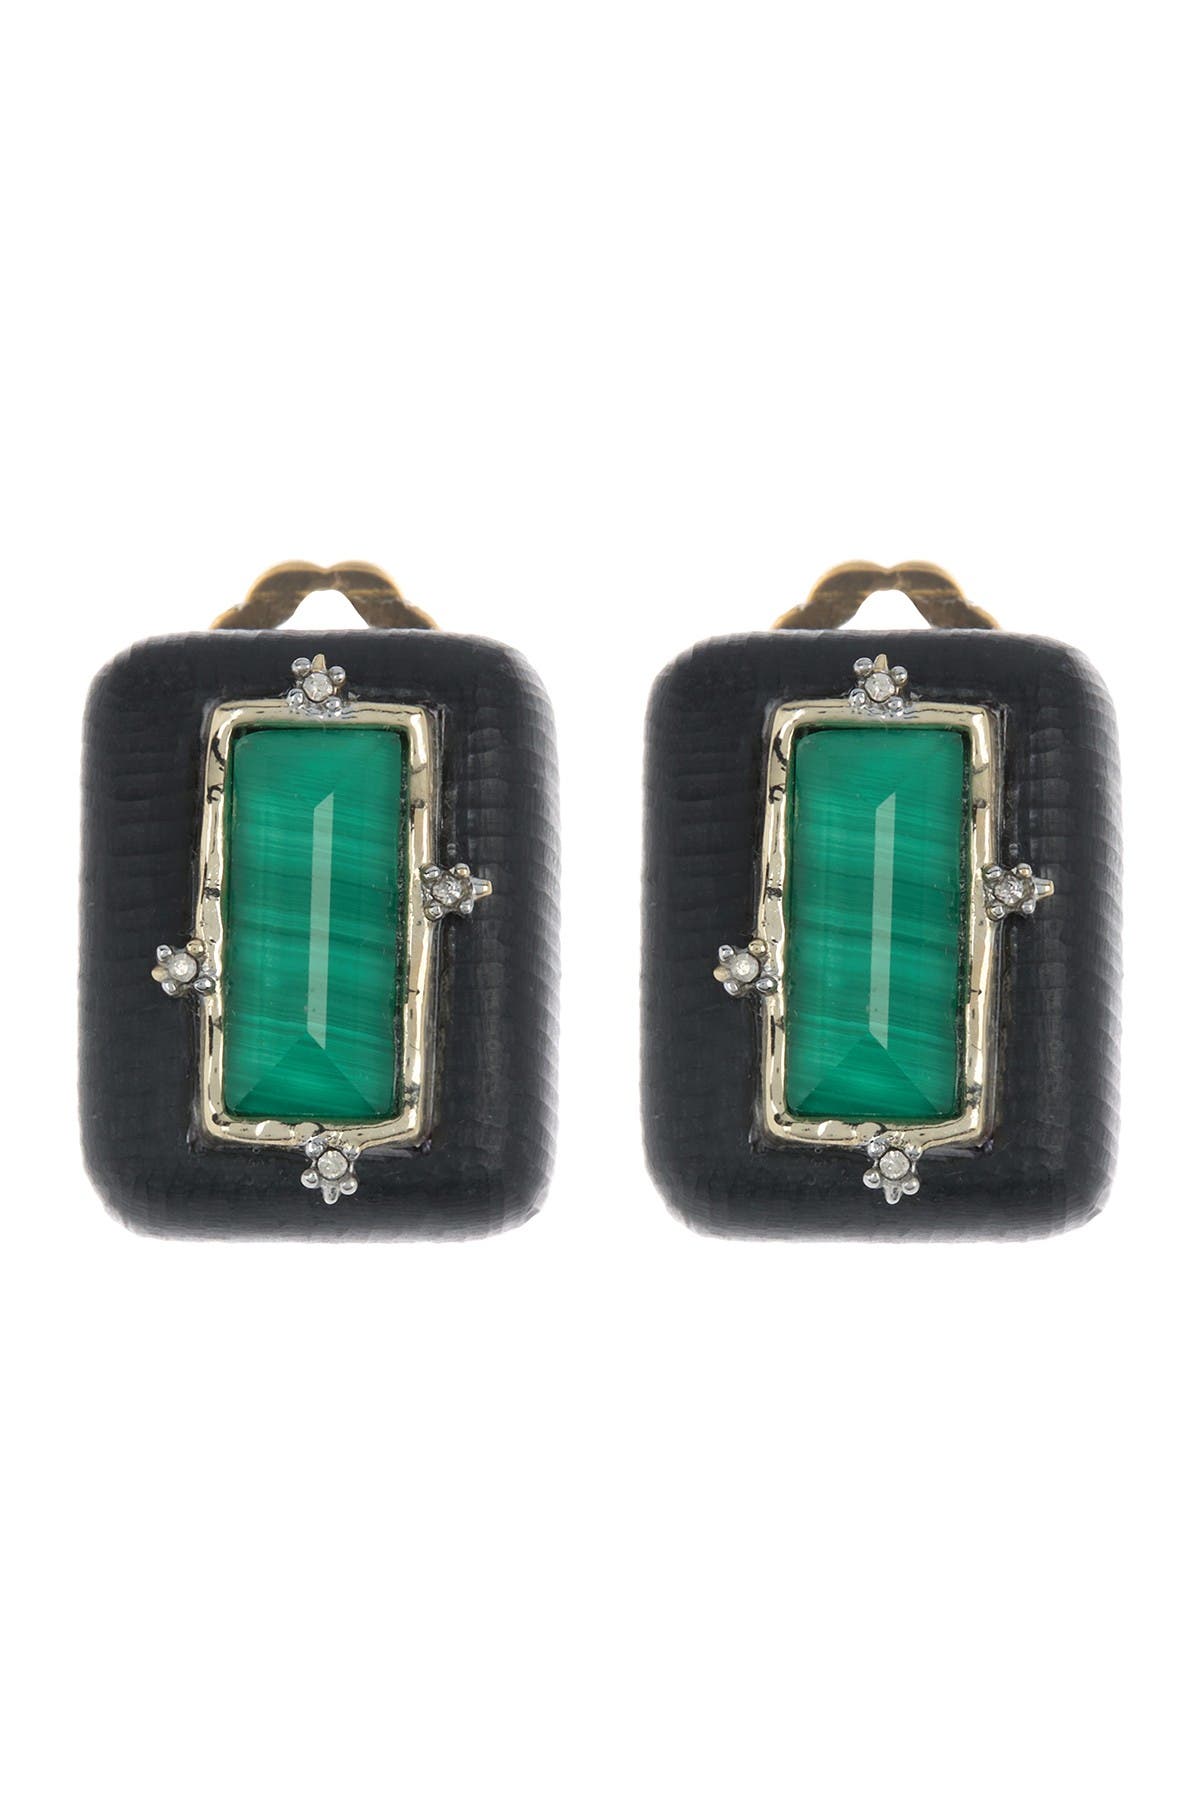 Alexis Bittar Stone Studded Retro Button Clip-on Earrings In Black